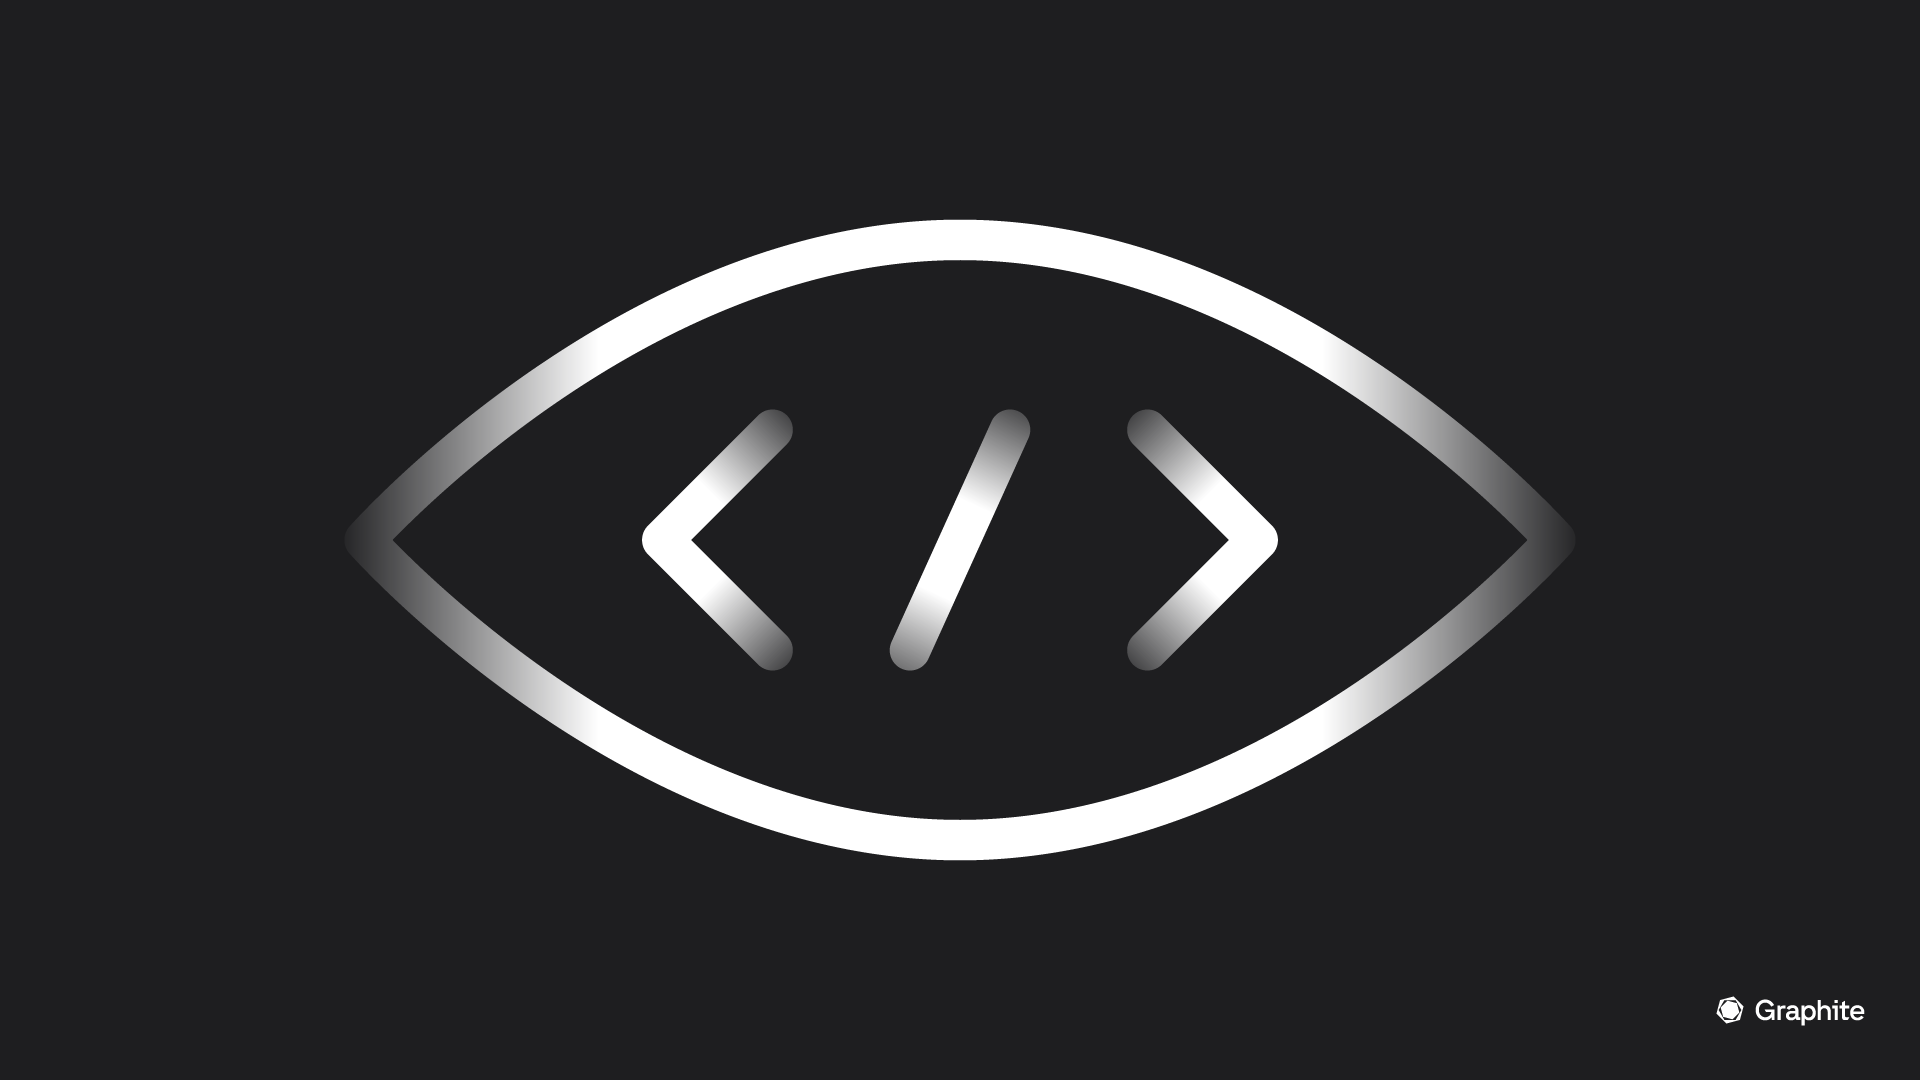 a simplistic spin and nod to Phabricator's logo showing an eye-like shape with coding brackets inside